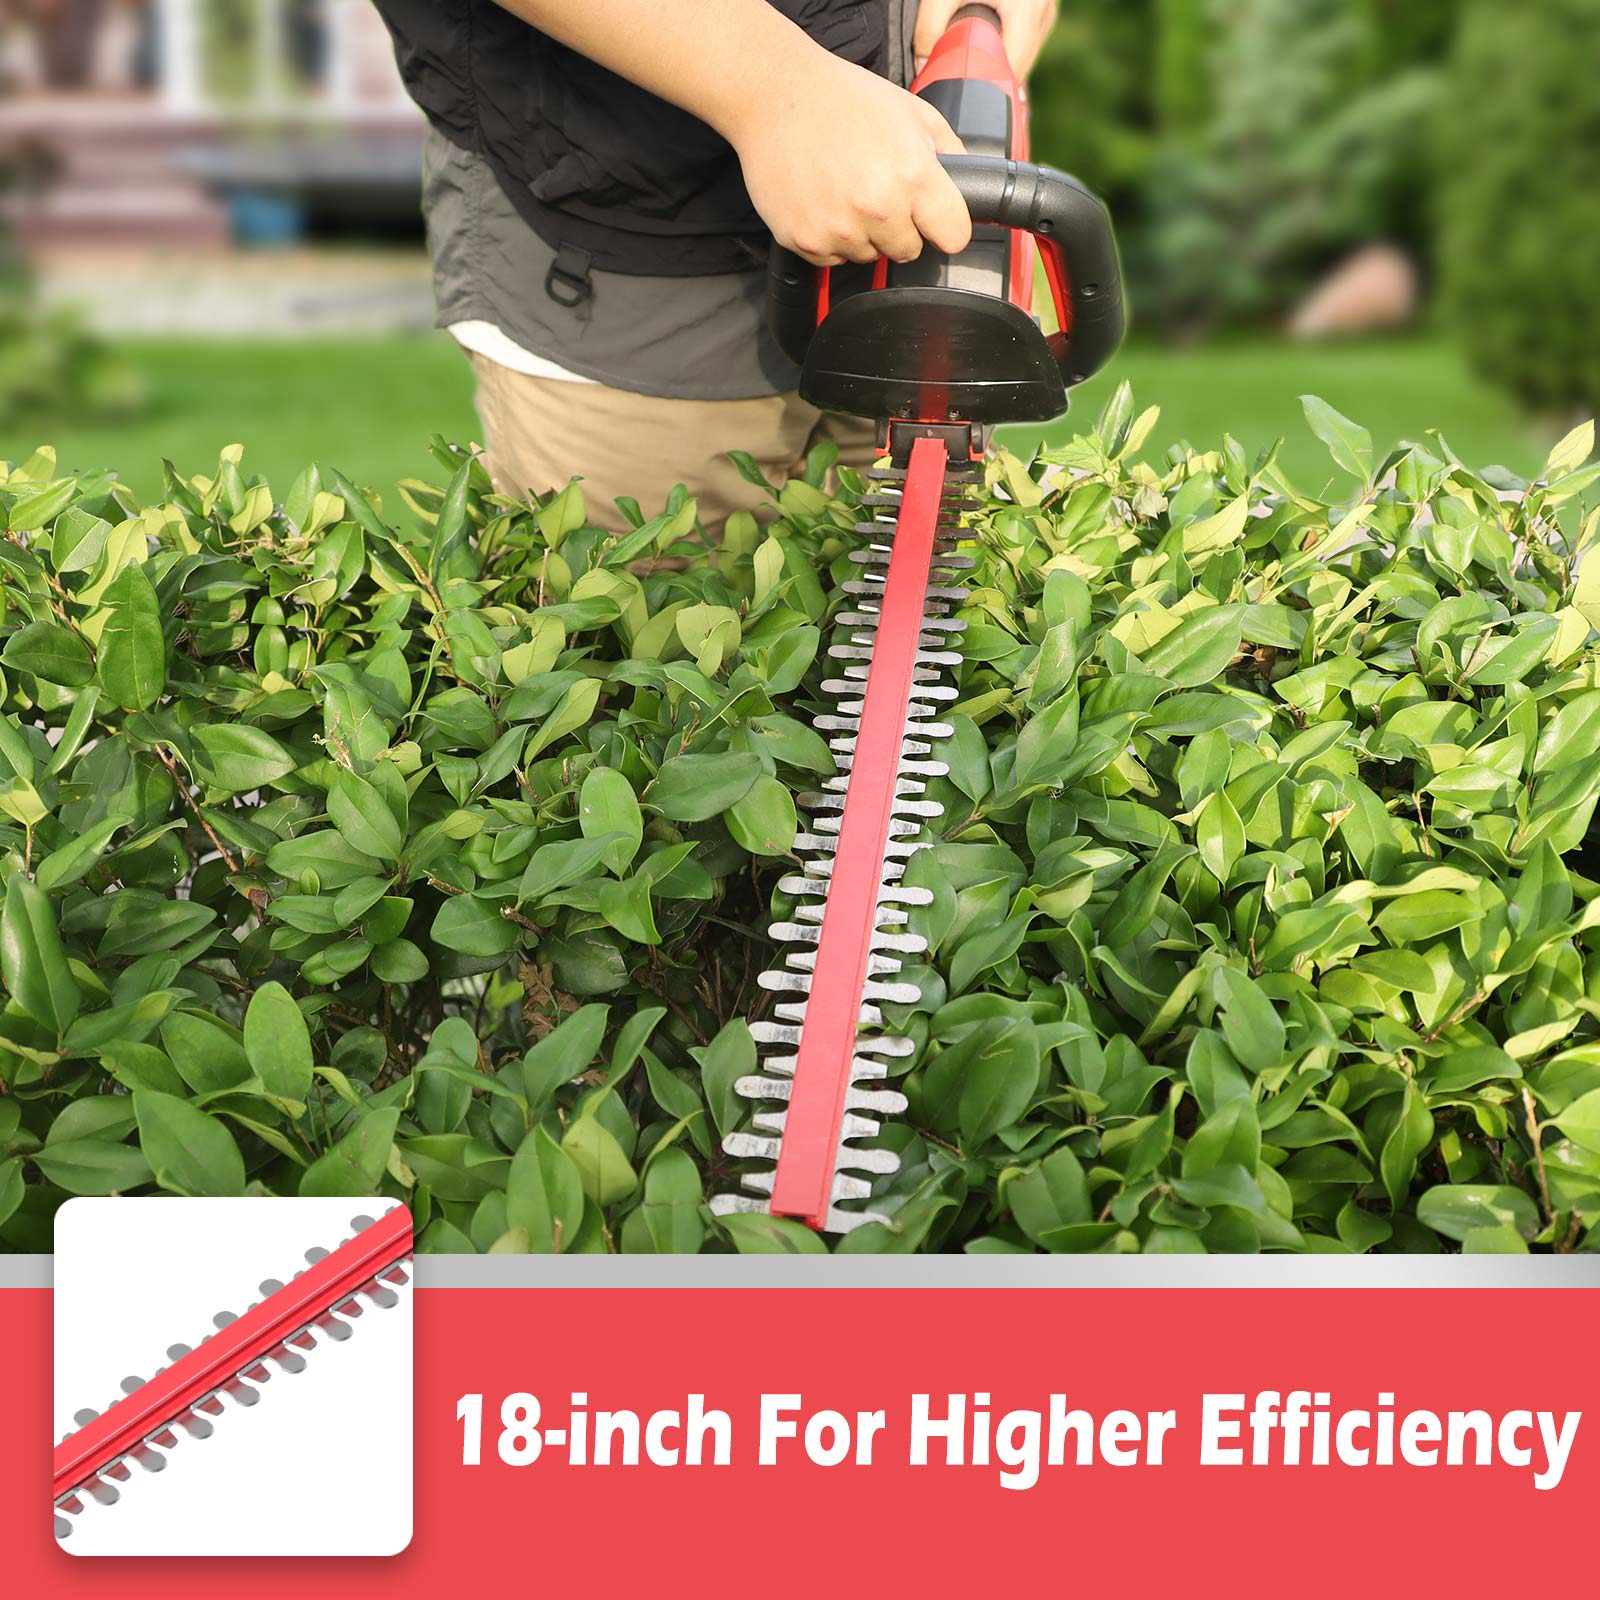 Powersmart 20V Lithium-Ion Cordless 22 inch Hedge Trimmer, PS76106A 2.0 Ah Battery and Charger Included